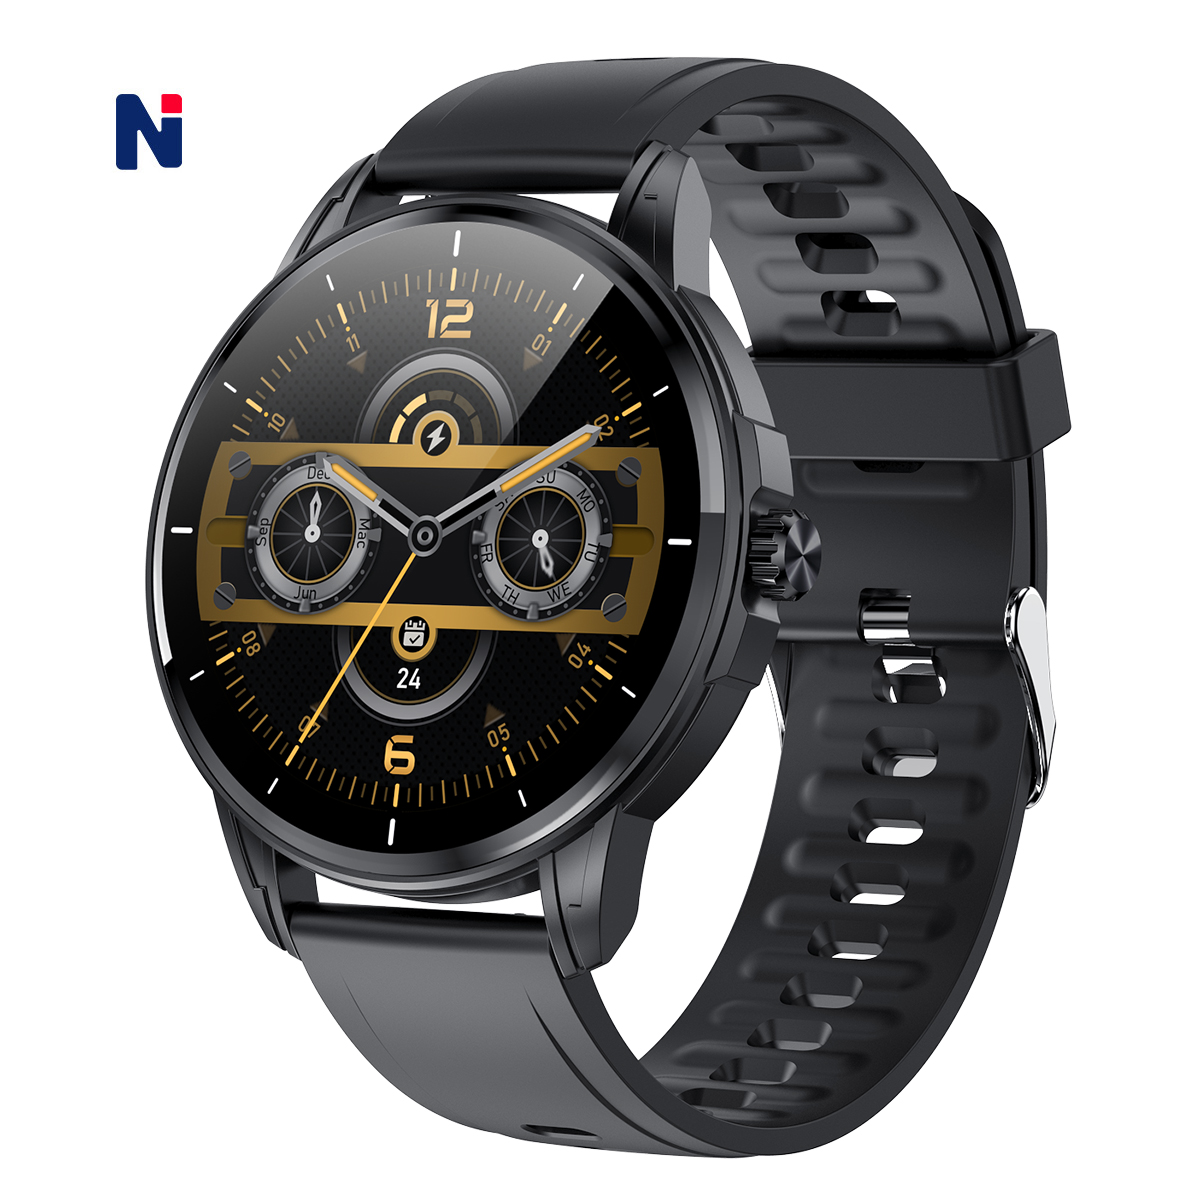 Discounted Products 4G Series 6 Smart Watch Fitness NHK04 Smart bracelet